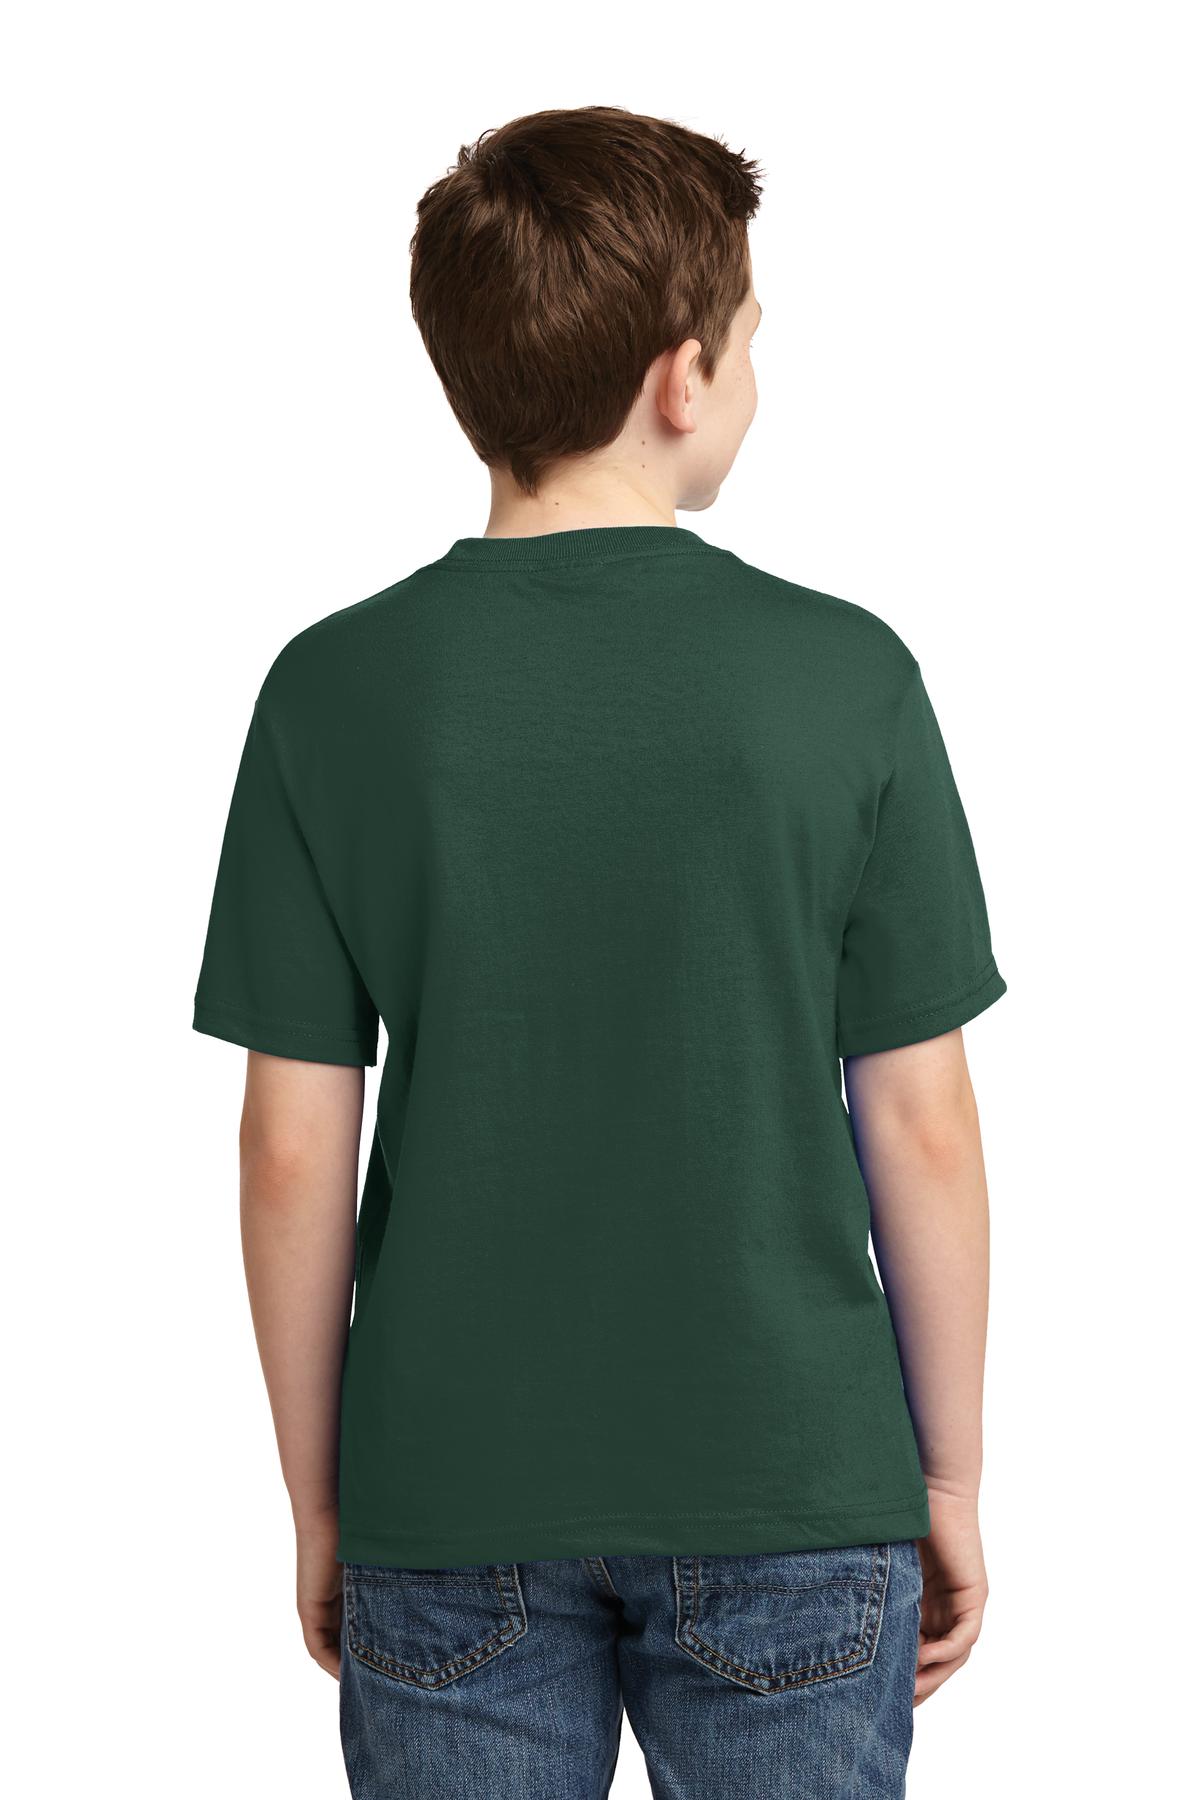 JERZEES® - Youth Dri-Power® 50/50 Cotton/Poly T-Shirt. 29B [Forest Green] - DFW Impression